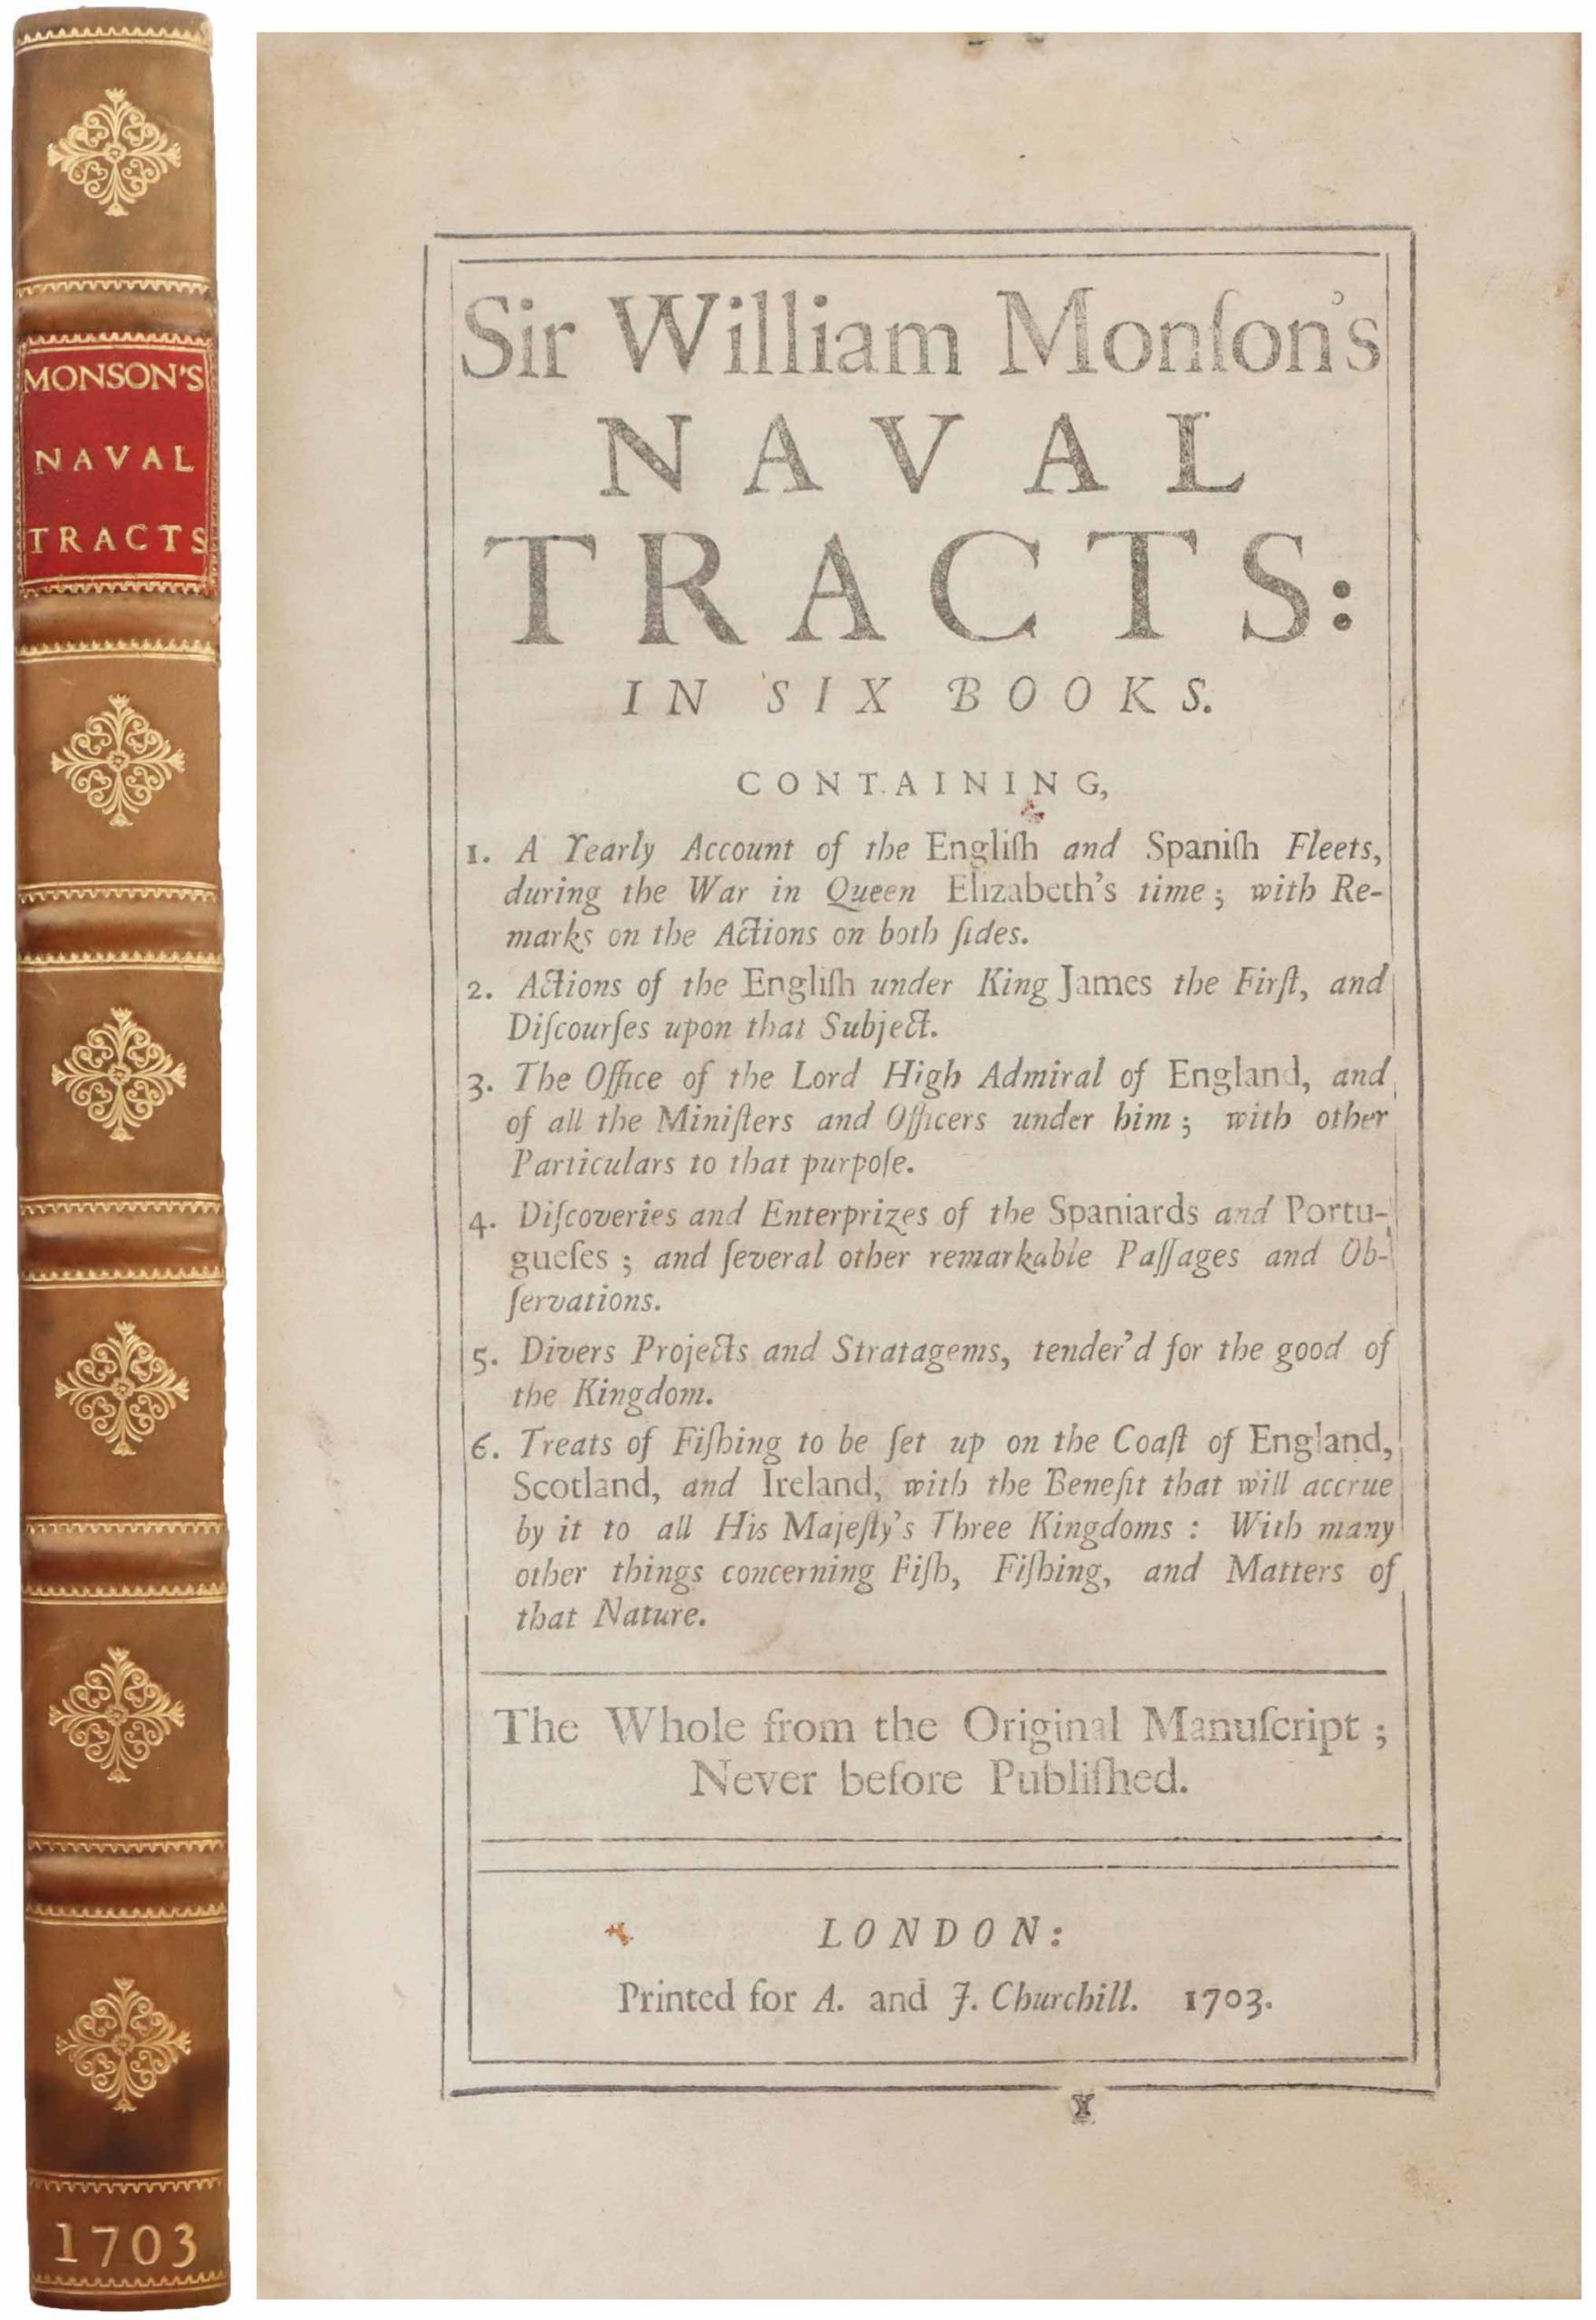 Monson's Naval Tracts 1703